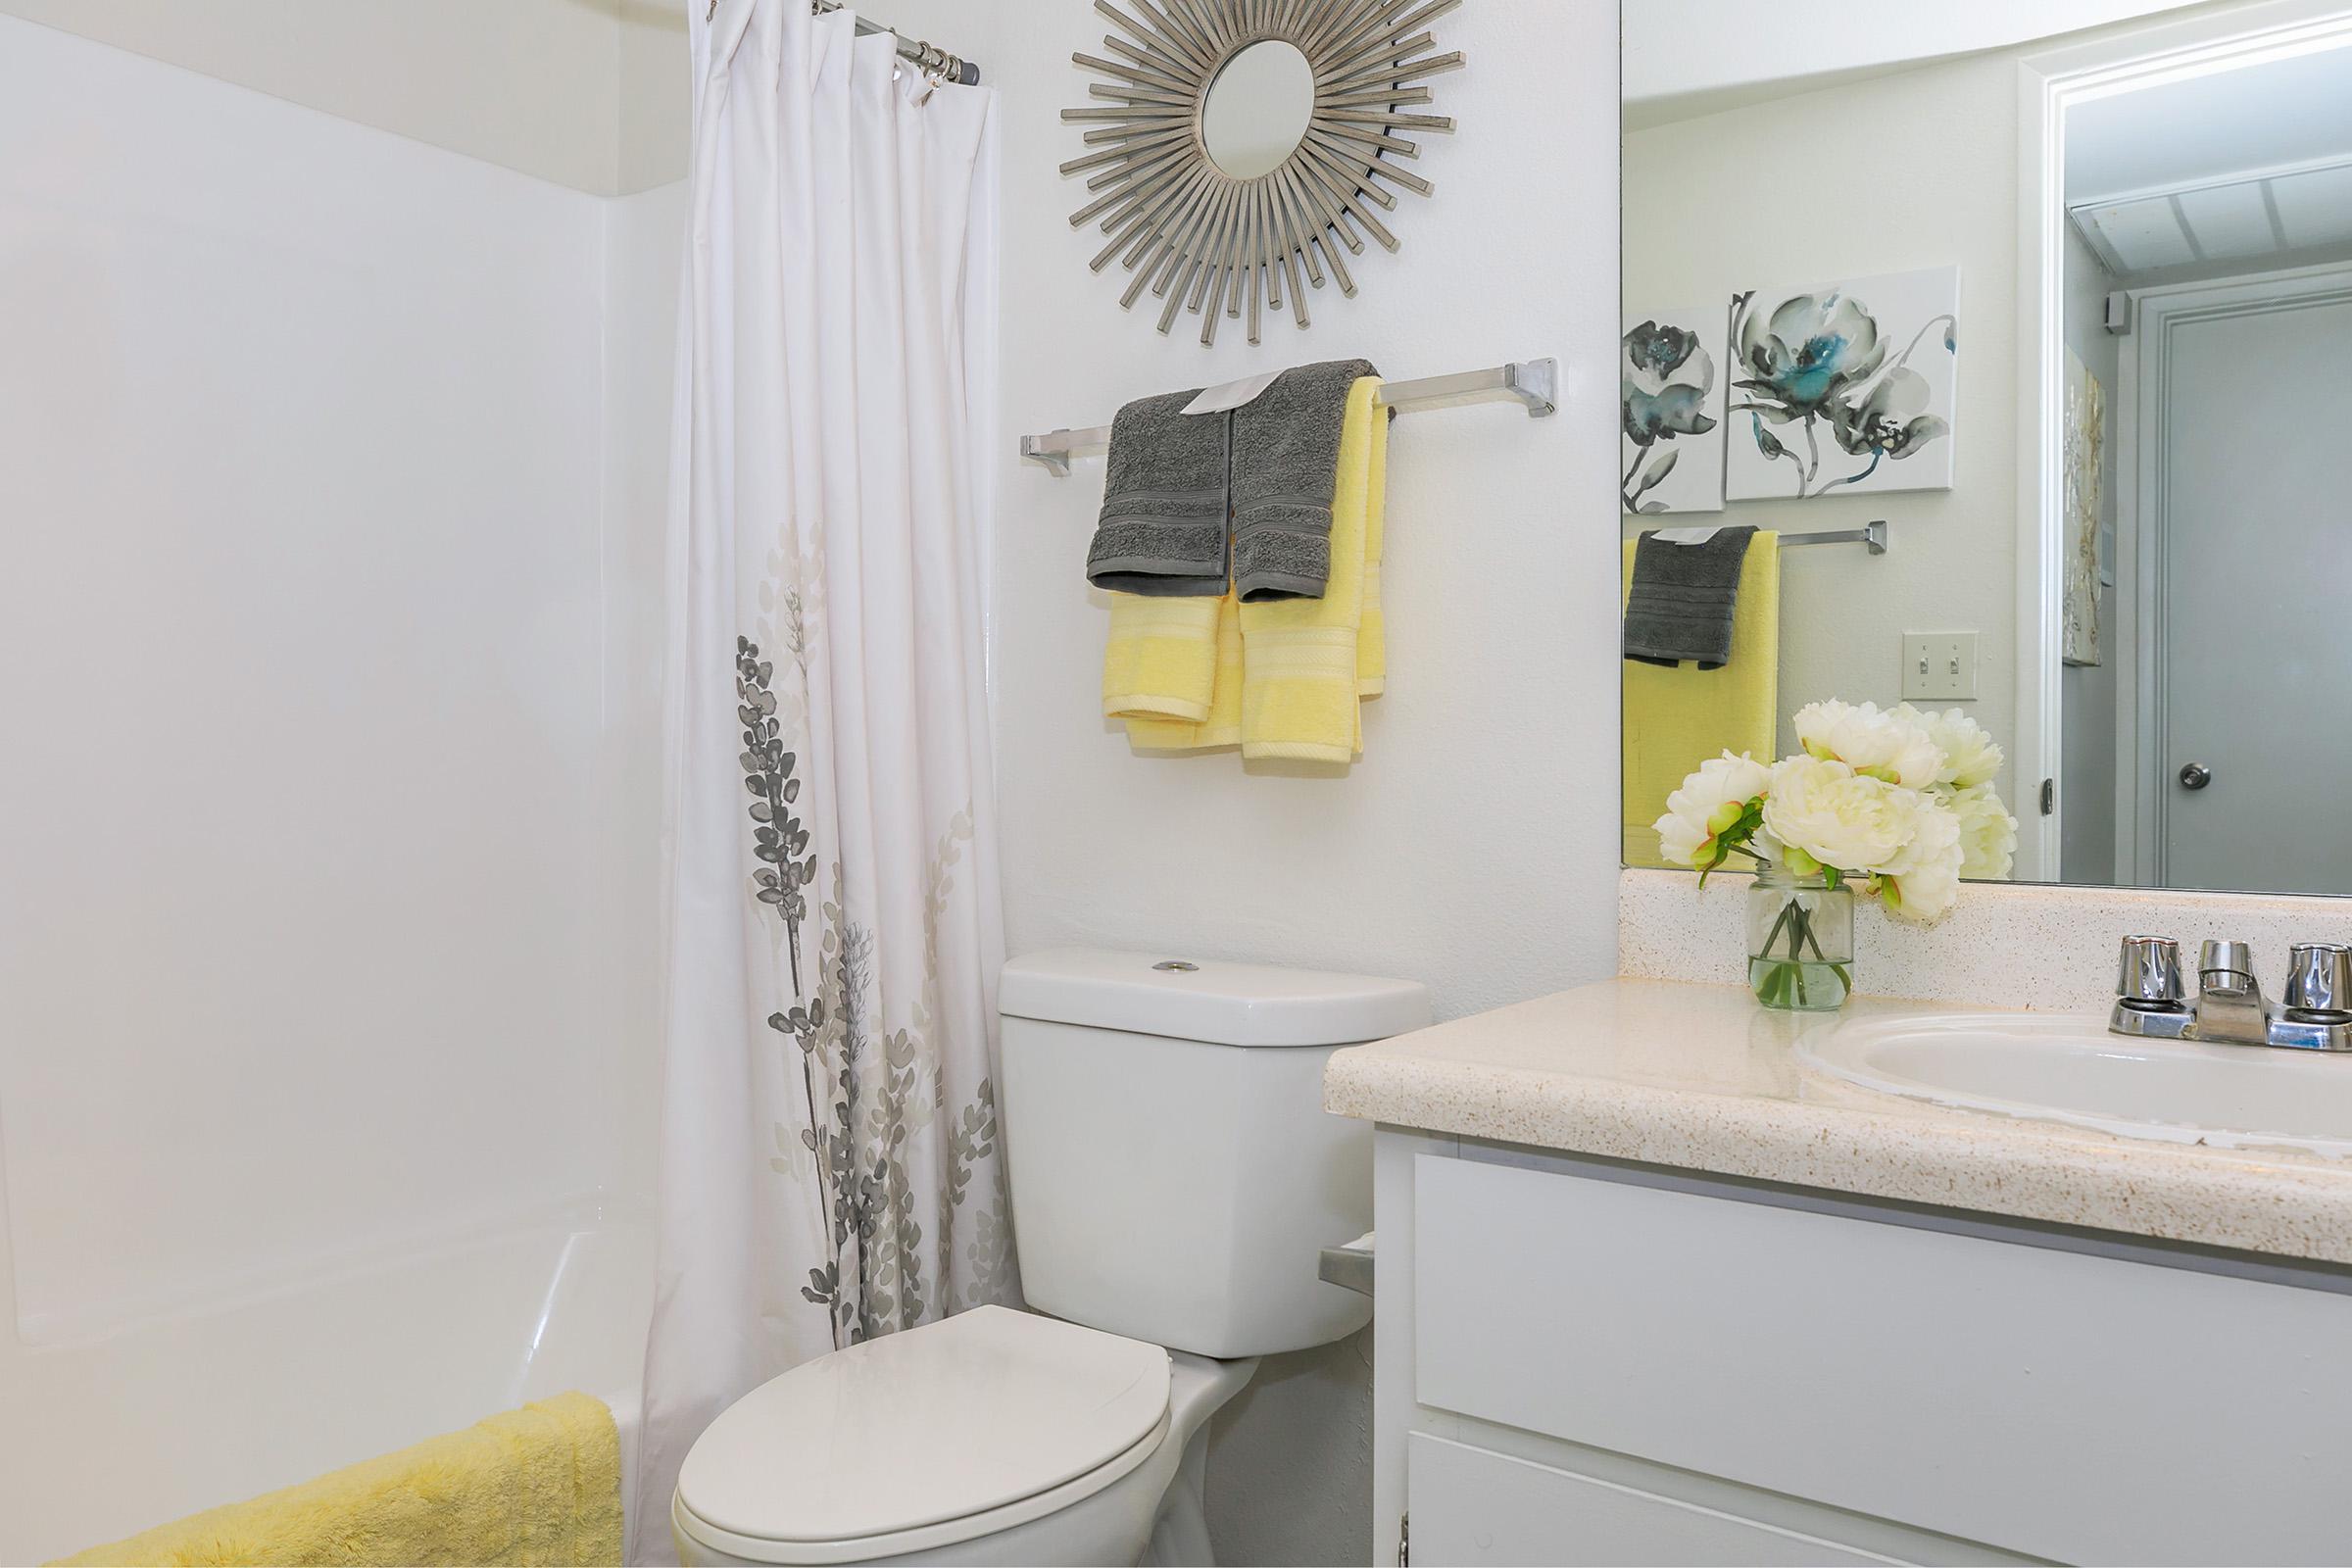 A bathroom with yellow towels, a white vanity and a shower at Rise North Ridge.